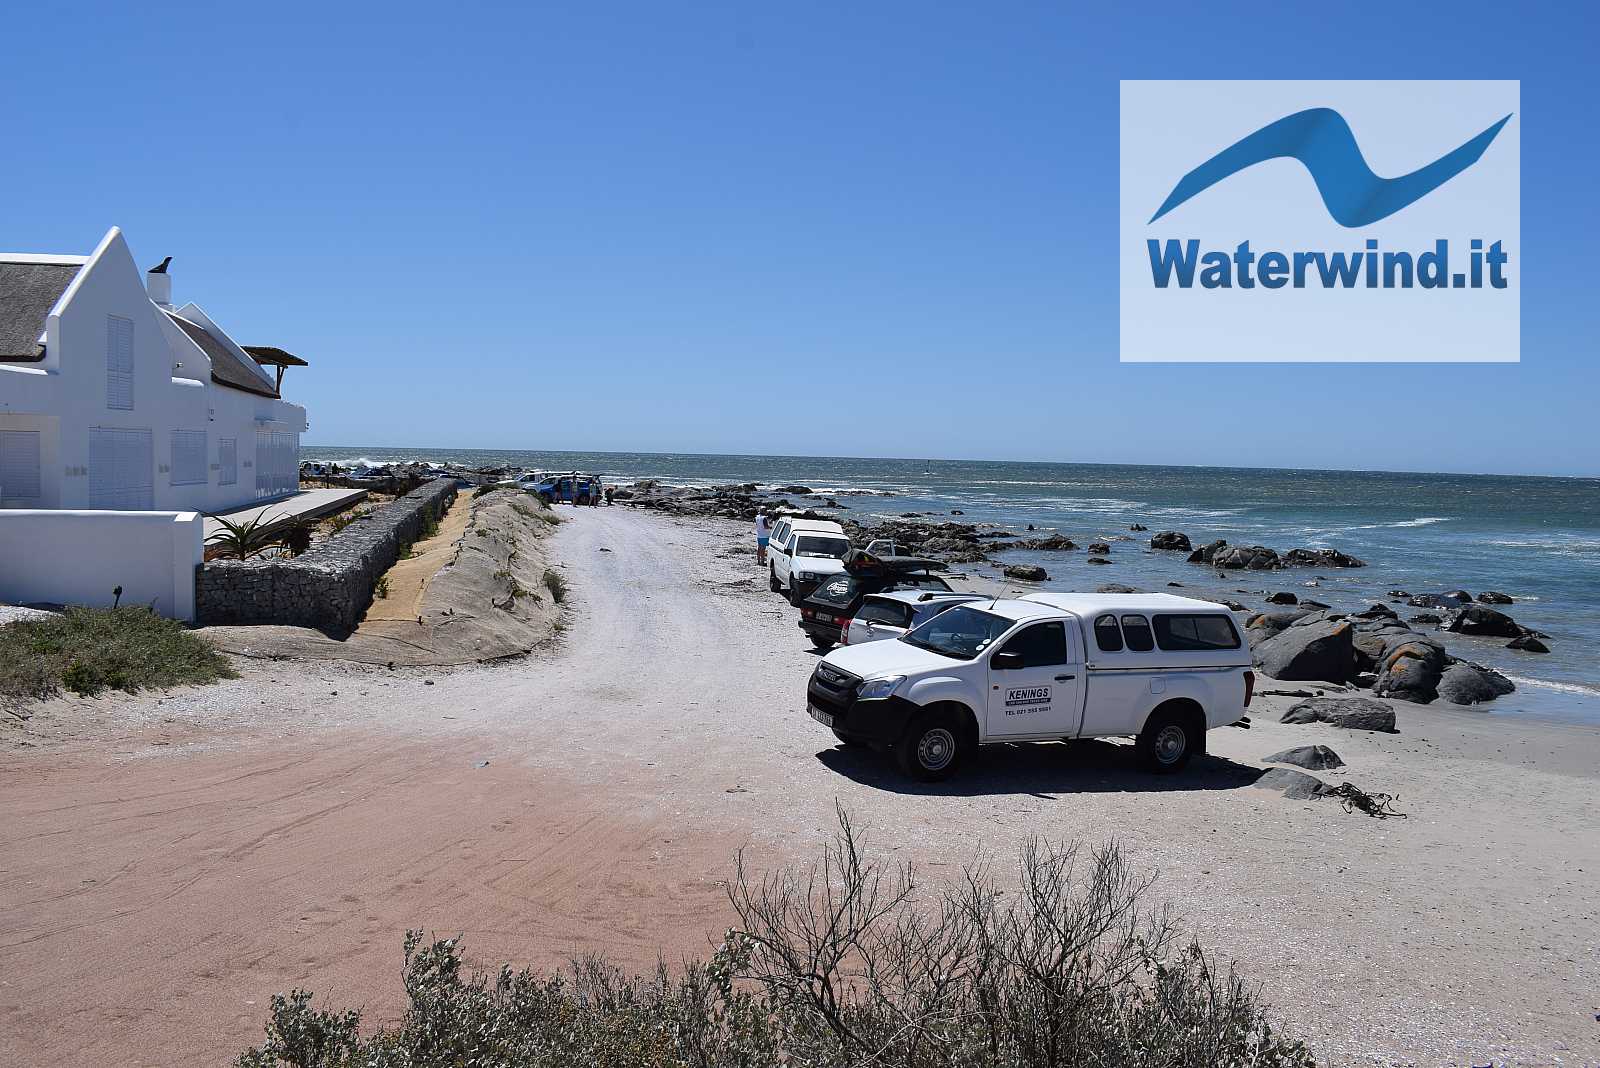 Paternoster (South Africa), 19/01/2019